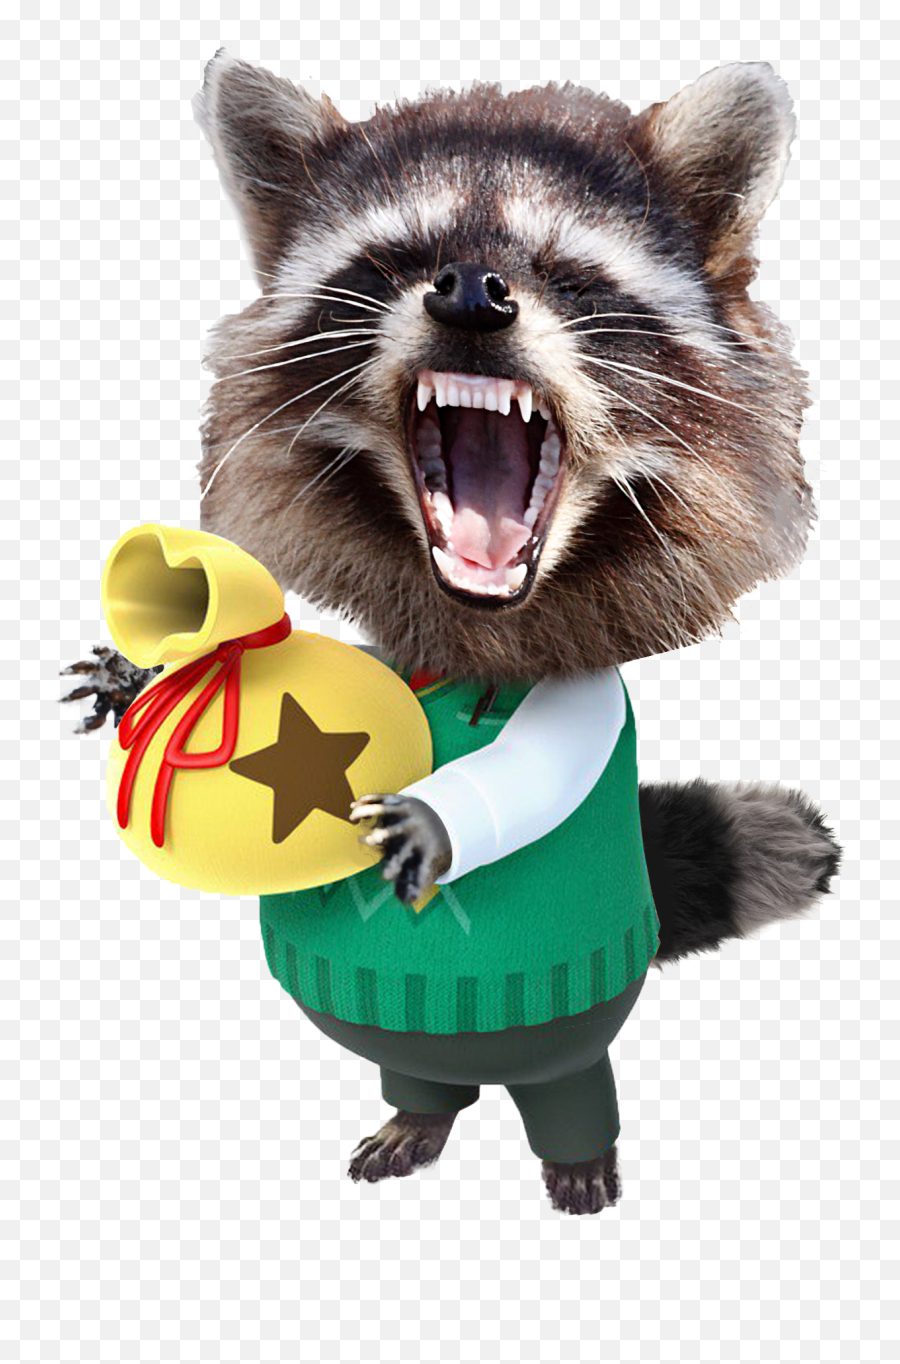 My Intro To Photoshop Class - Cute Animal Crossing Cute Tom Nook Png,Rocket Racoon Icon